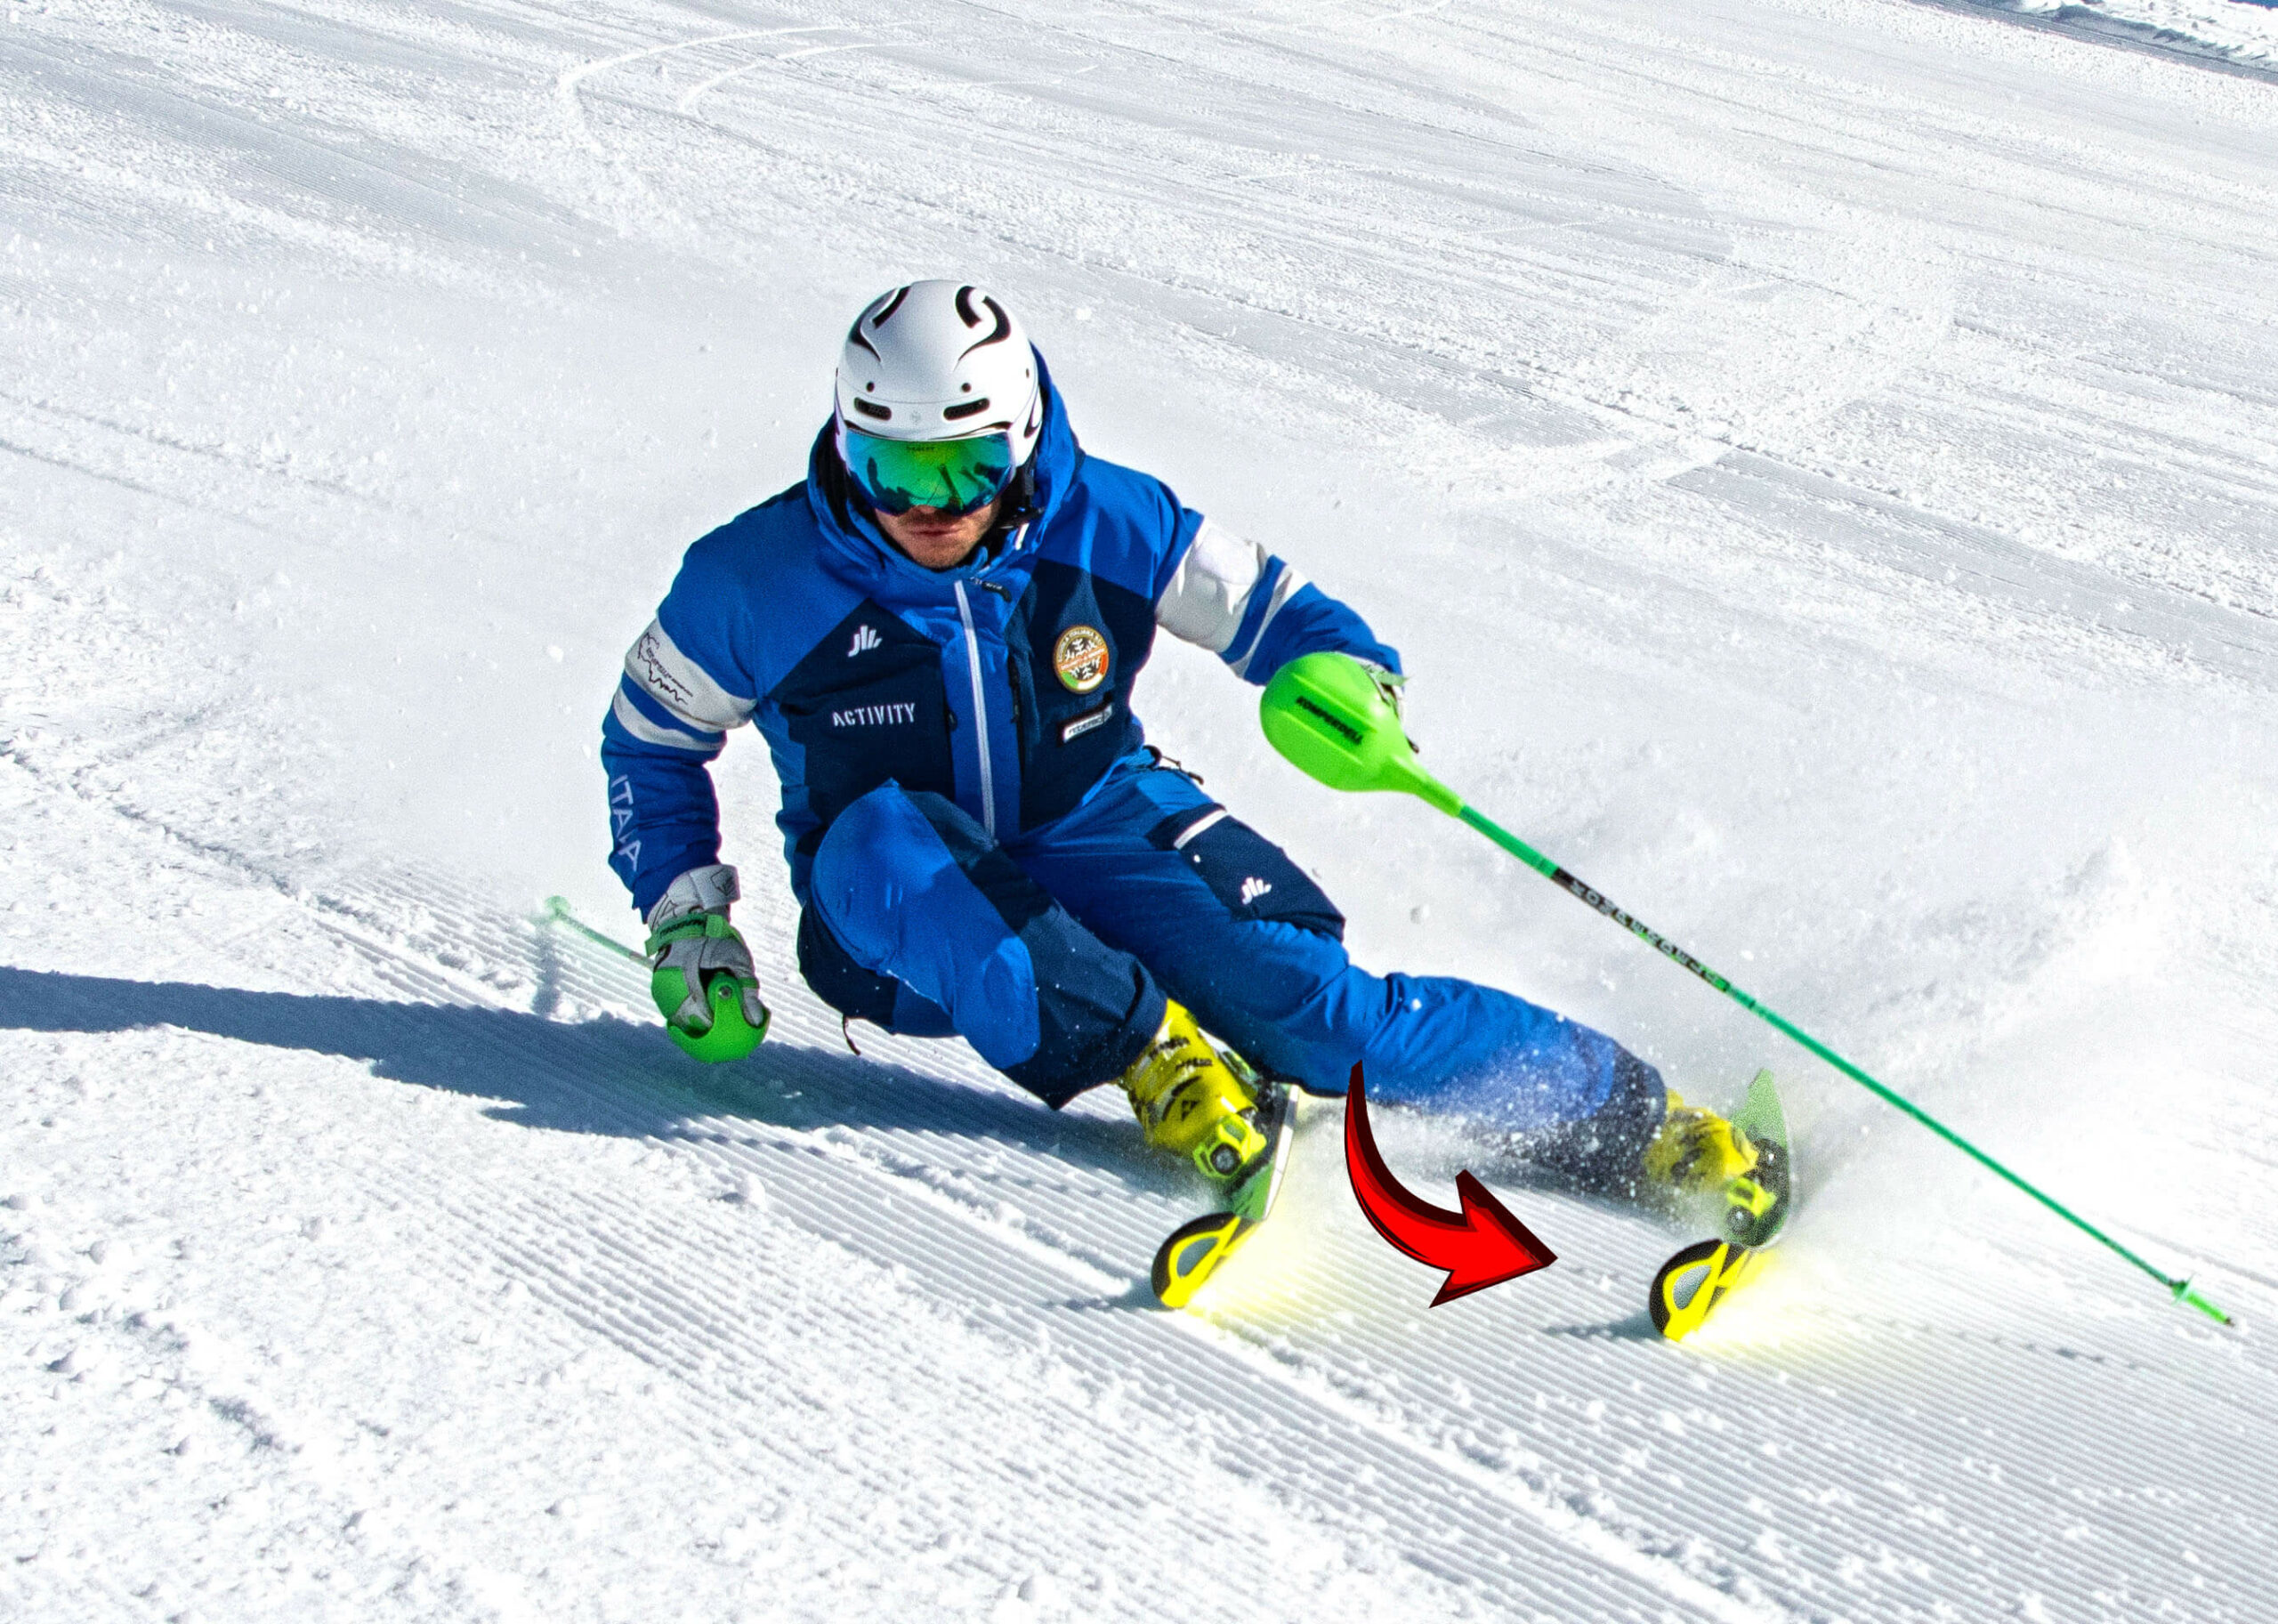 Italian ski instructor showing strong ankle flexion